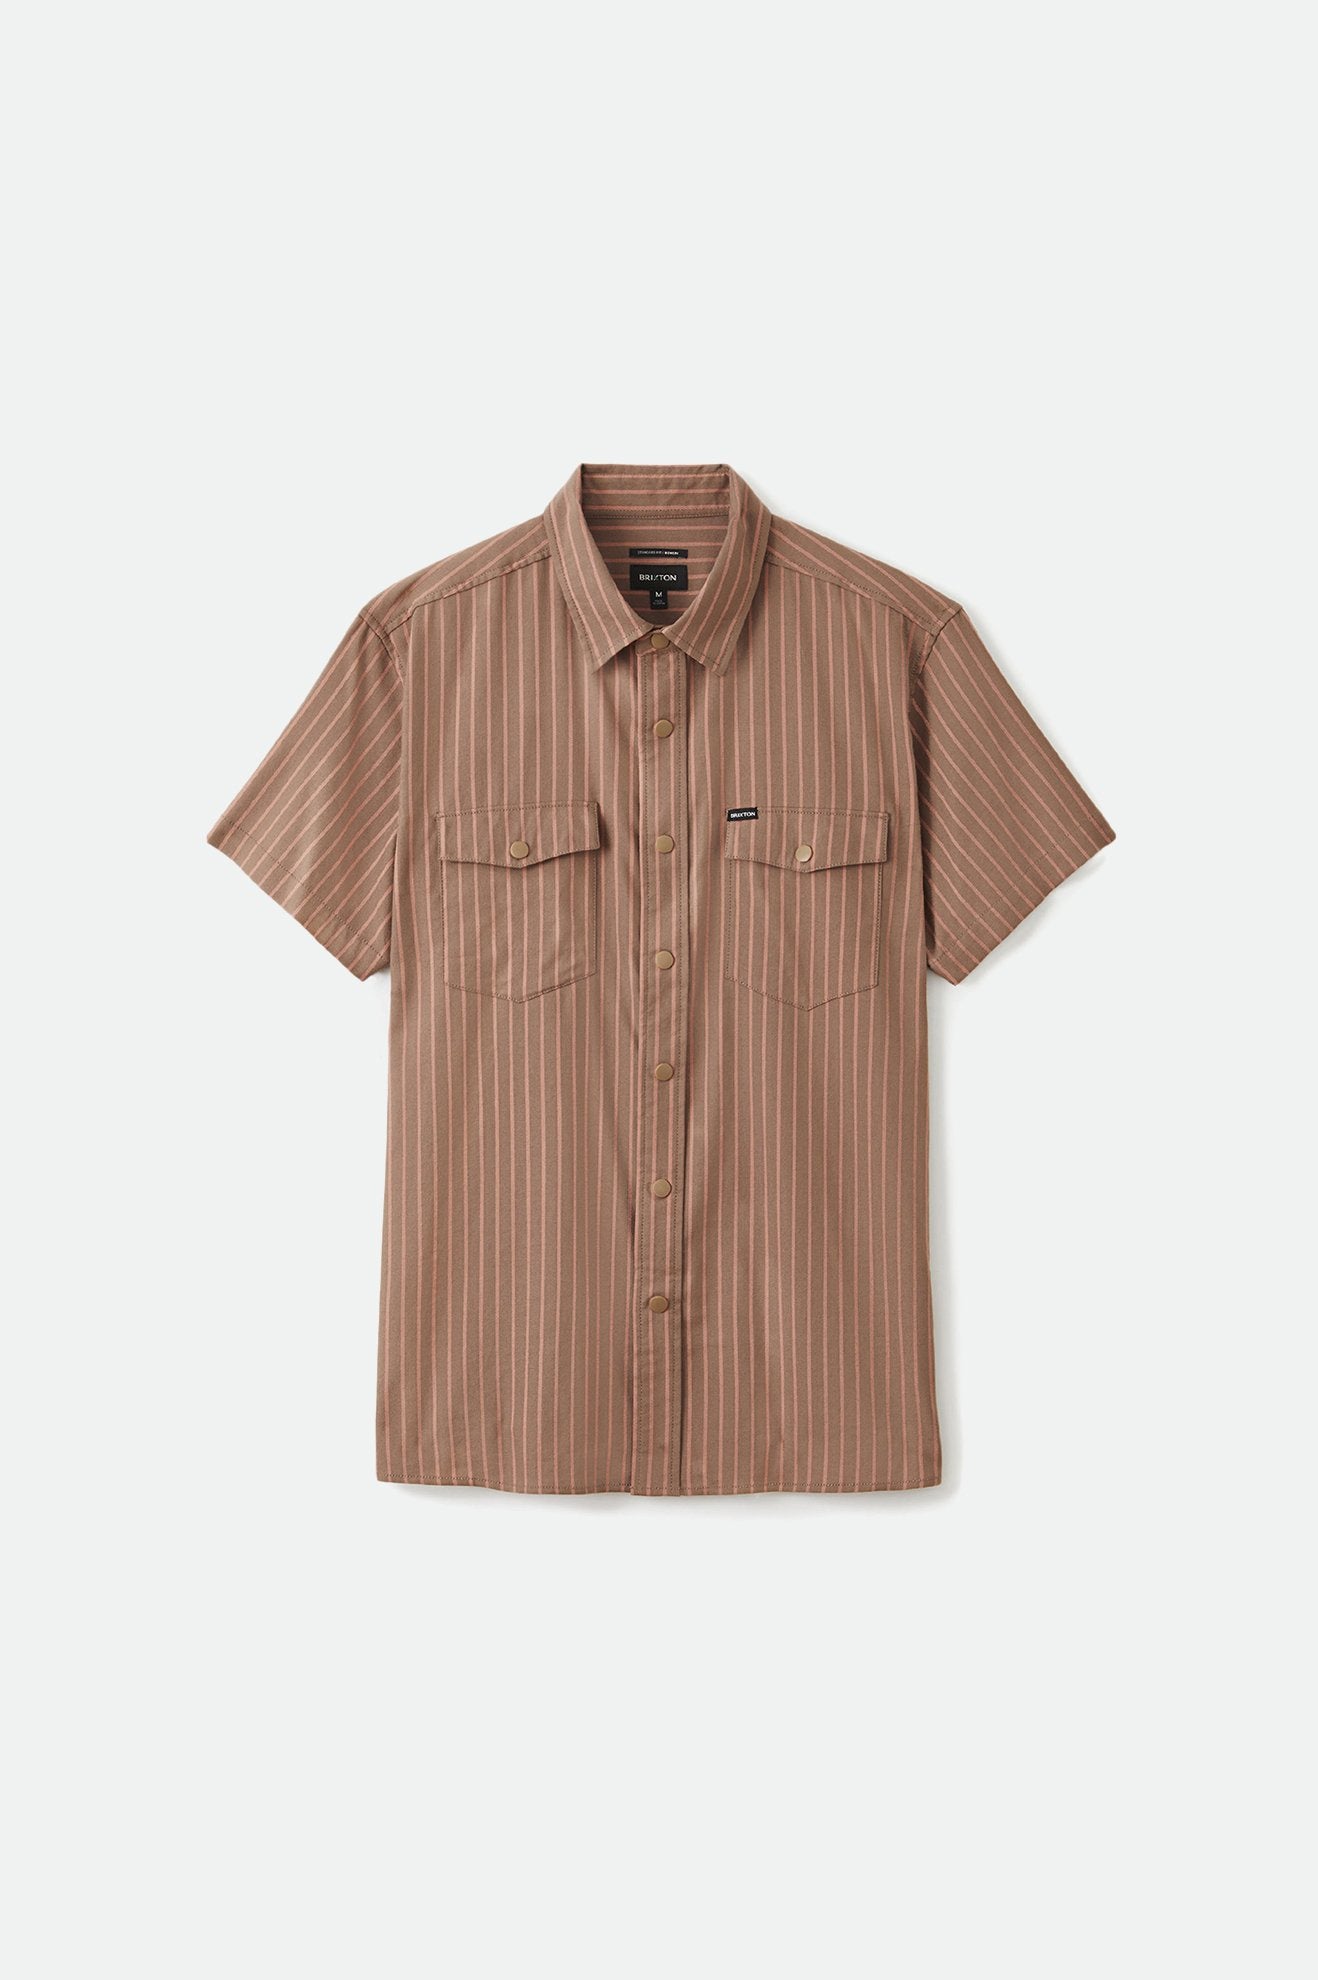 Olson Crossover S/S Woven